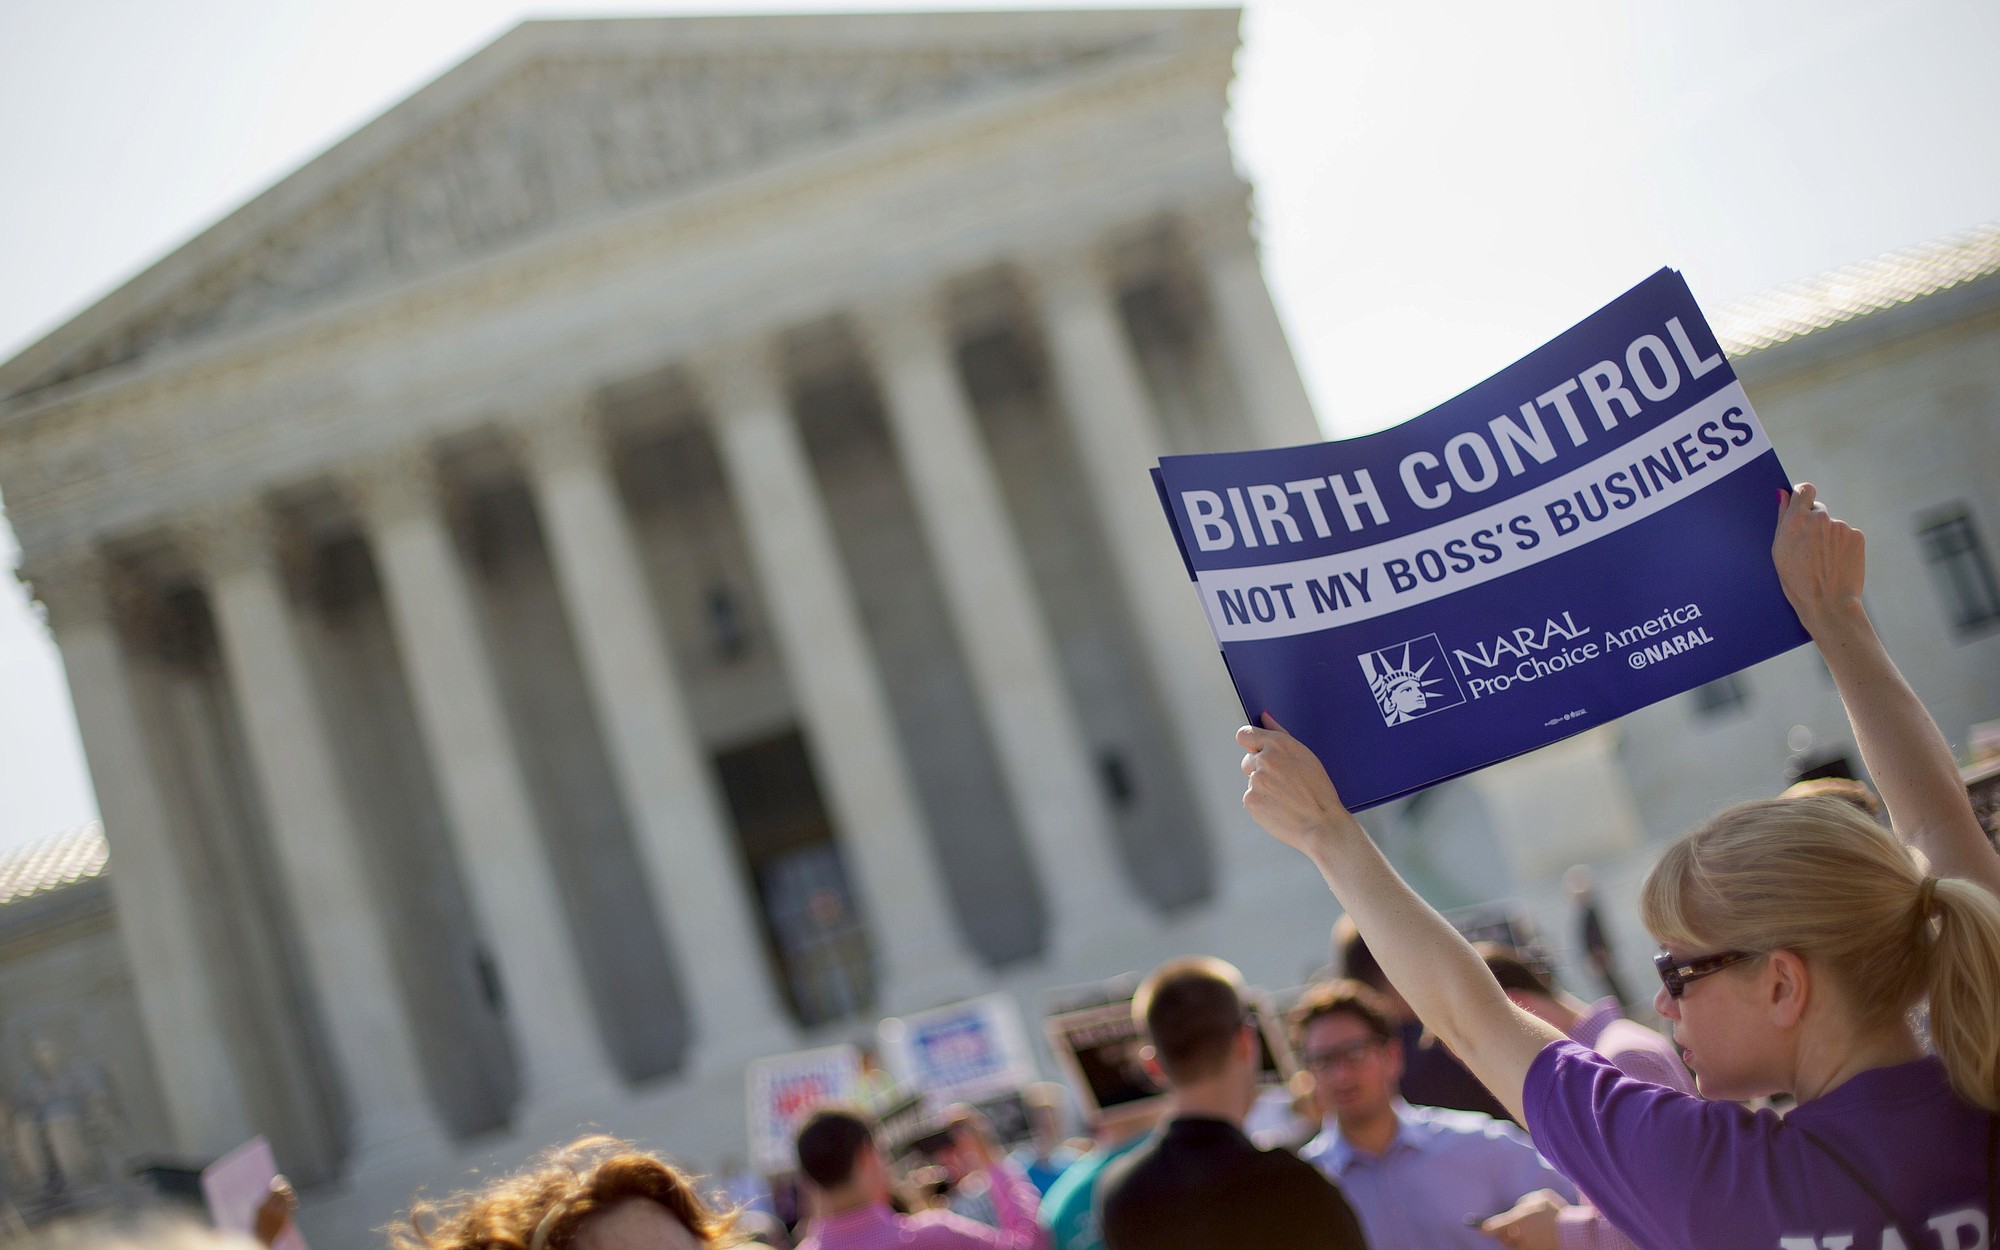 A demonstrator holds up a sign June 30 outside the Supreme Court in Washington on the day the court decided in the Hobby Lobby case to relieve businesses with religious objections of their obligation to pay for women's contraceptives among a range of preventive services the new health law calls for in their health plans.